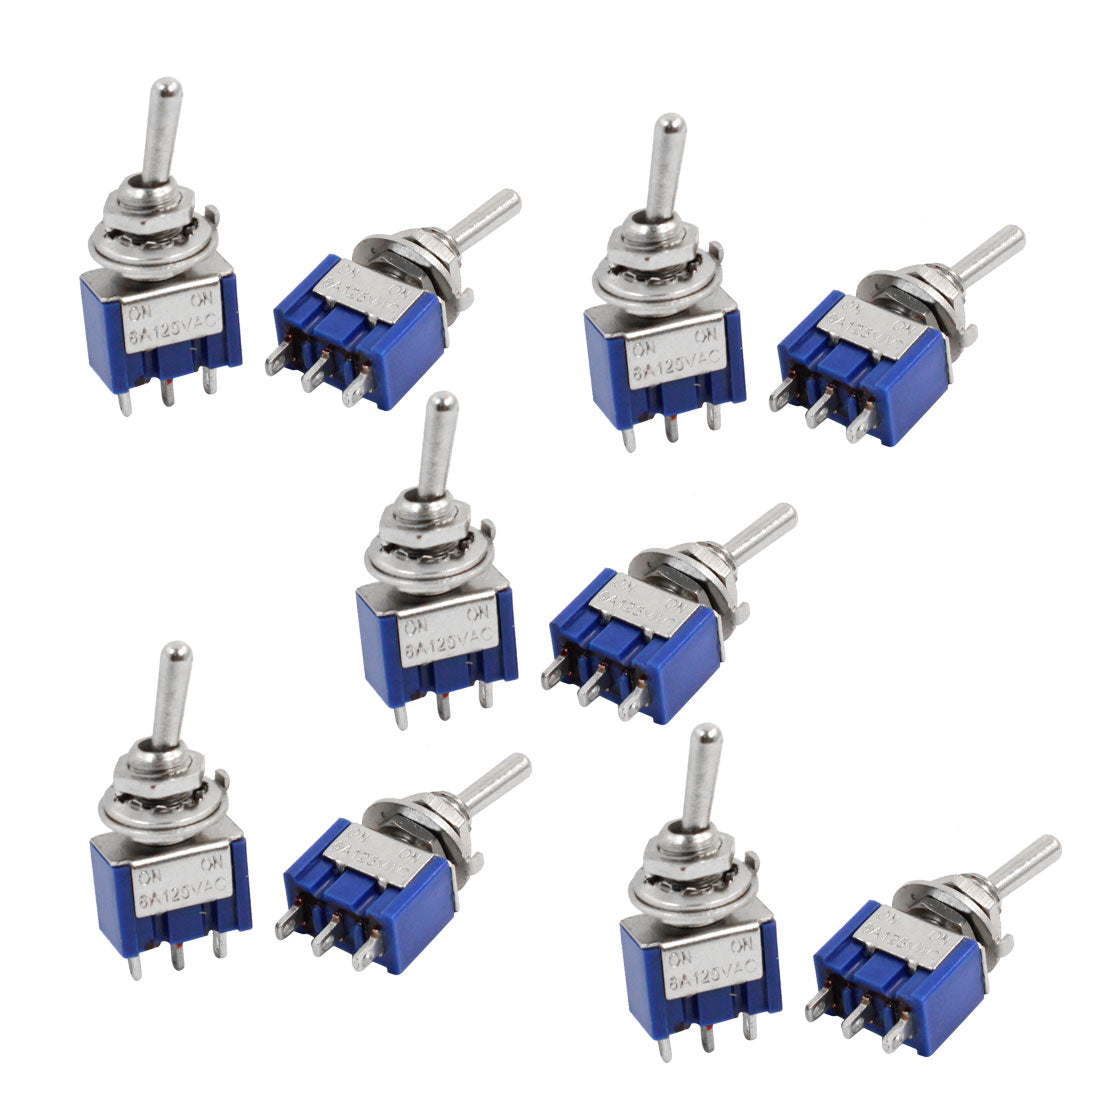 uxcell Uxcell 10pcs Self Locking Miniature Toggle Switch Blue 3 Pin 2-Position SPDT On/On AC125V 6A